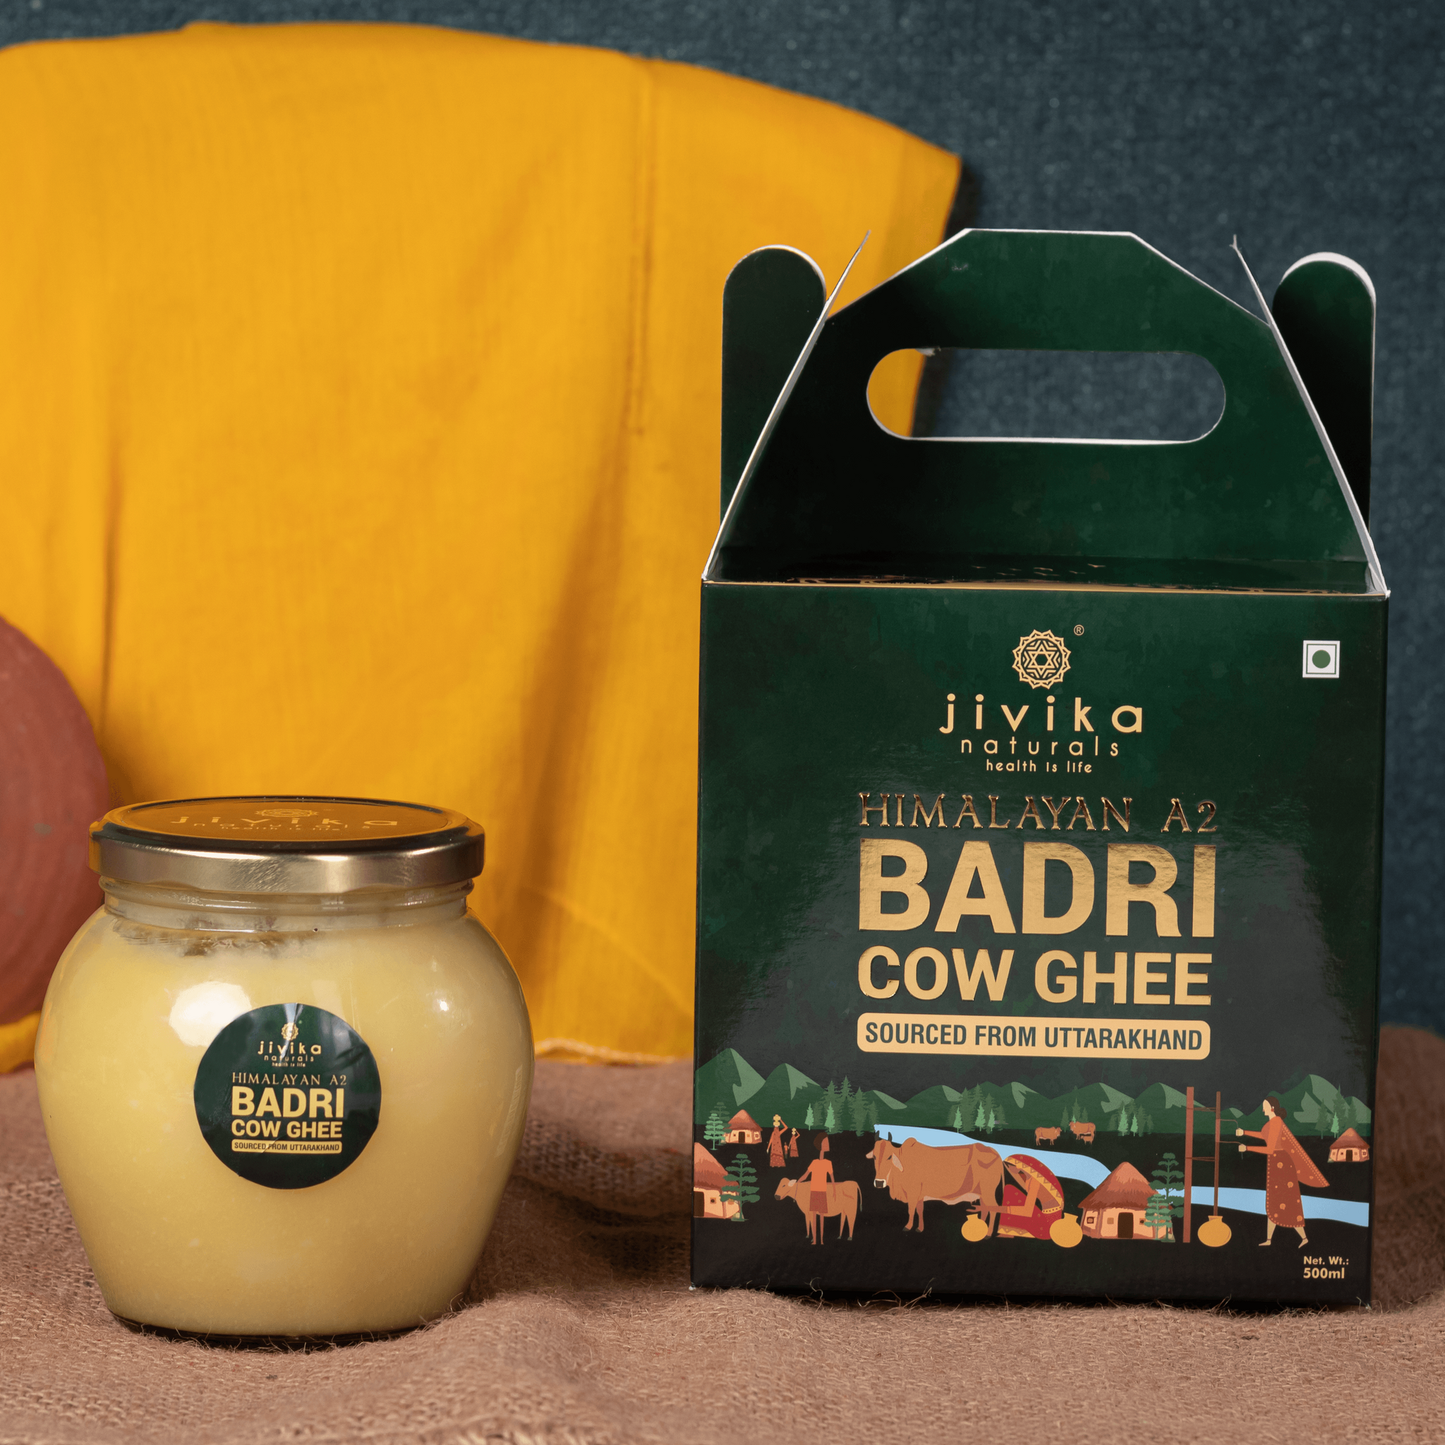 Himalayan A2 Badri Cow Ghee 500ml | Bilona Ghee from Uttarakhand | Churned from Whole Curds